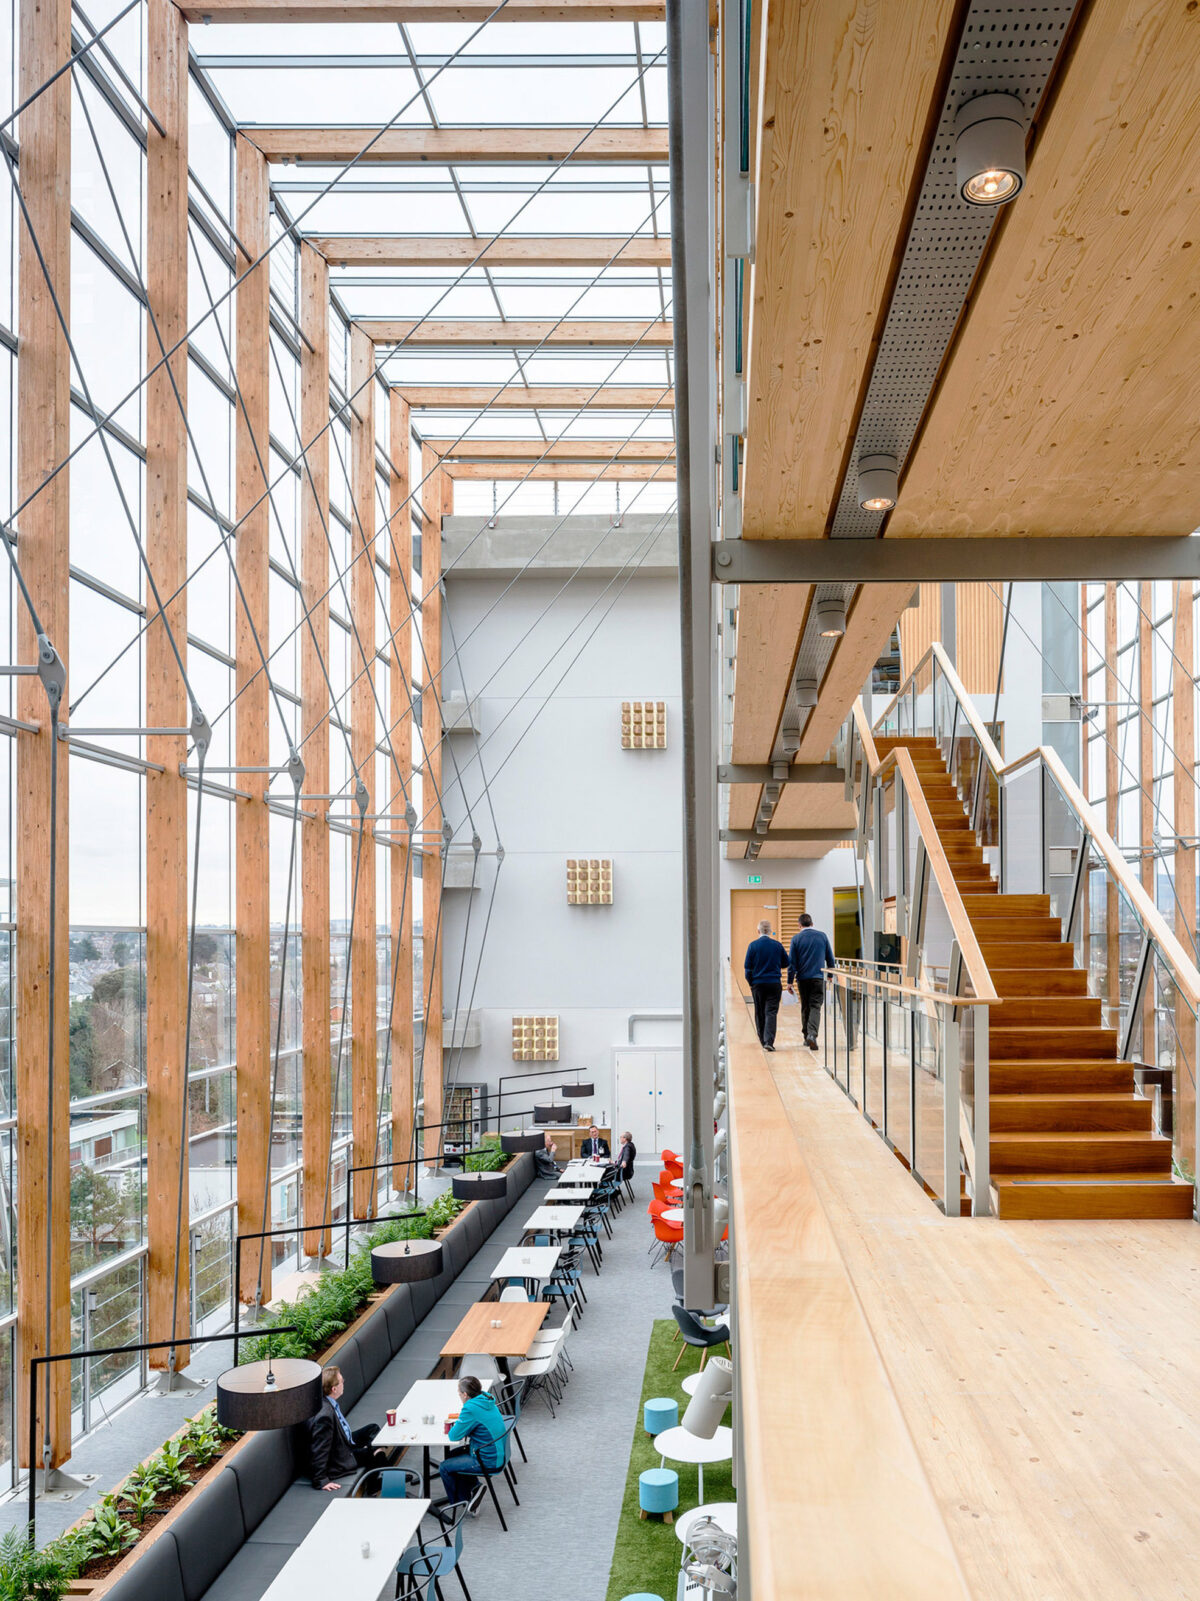 Spacious atrium with soaring wooden columns flanking a central walkway. Natural light floods the two-story space, highlighting the warm wood paneling and staircases that lead to balconies overlooking modern, open-plan seating areas below.